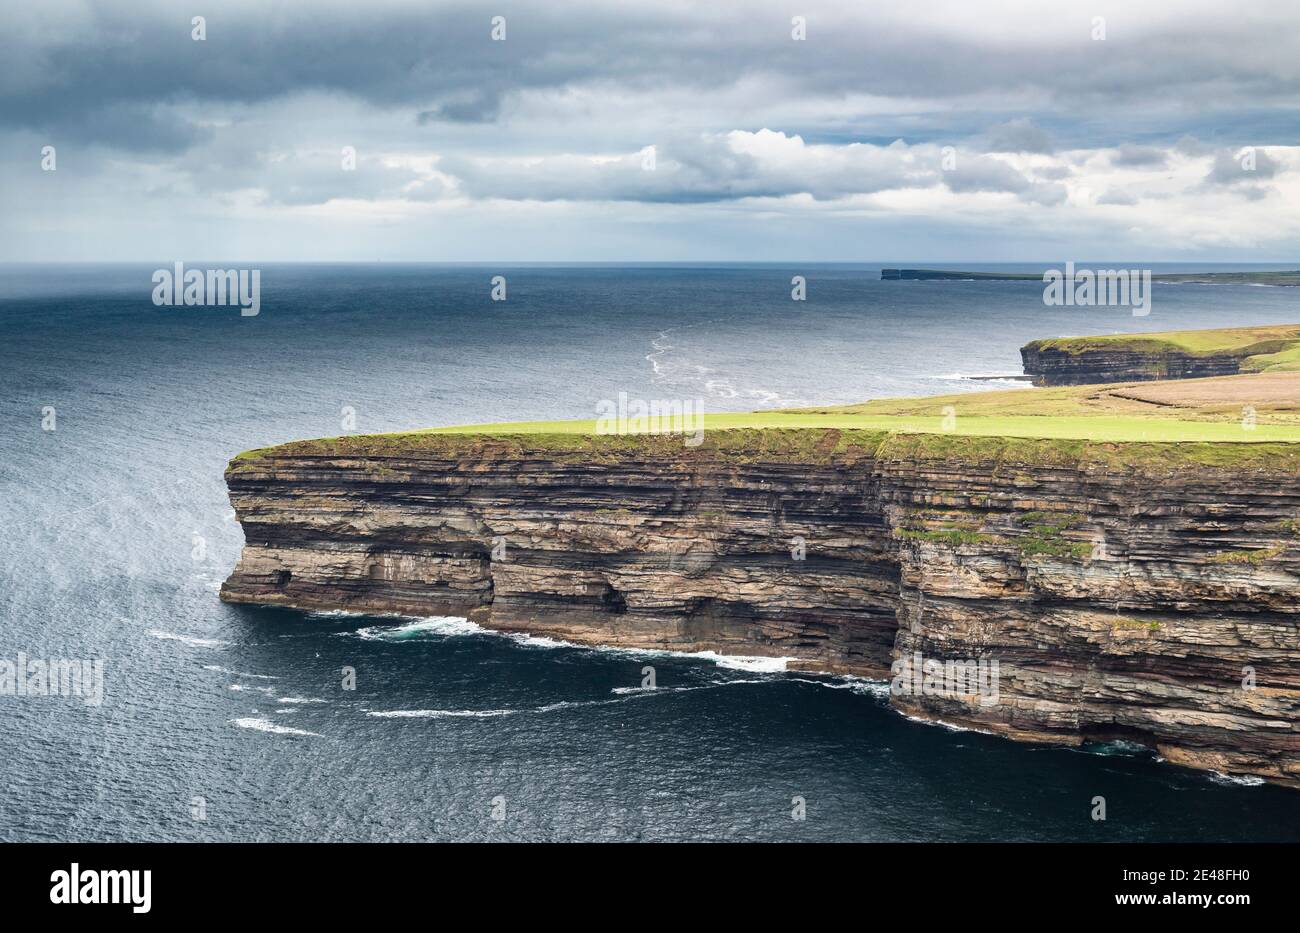 Cliffs of interbedded Lower Carboniferous limestones and shales protruding into the Atlantic Ocean near Downpatrick Head, north Mayo, Ireland Stock Photo